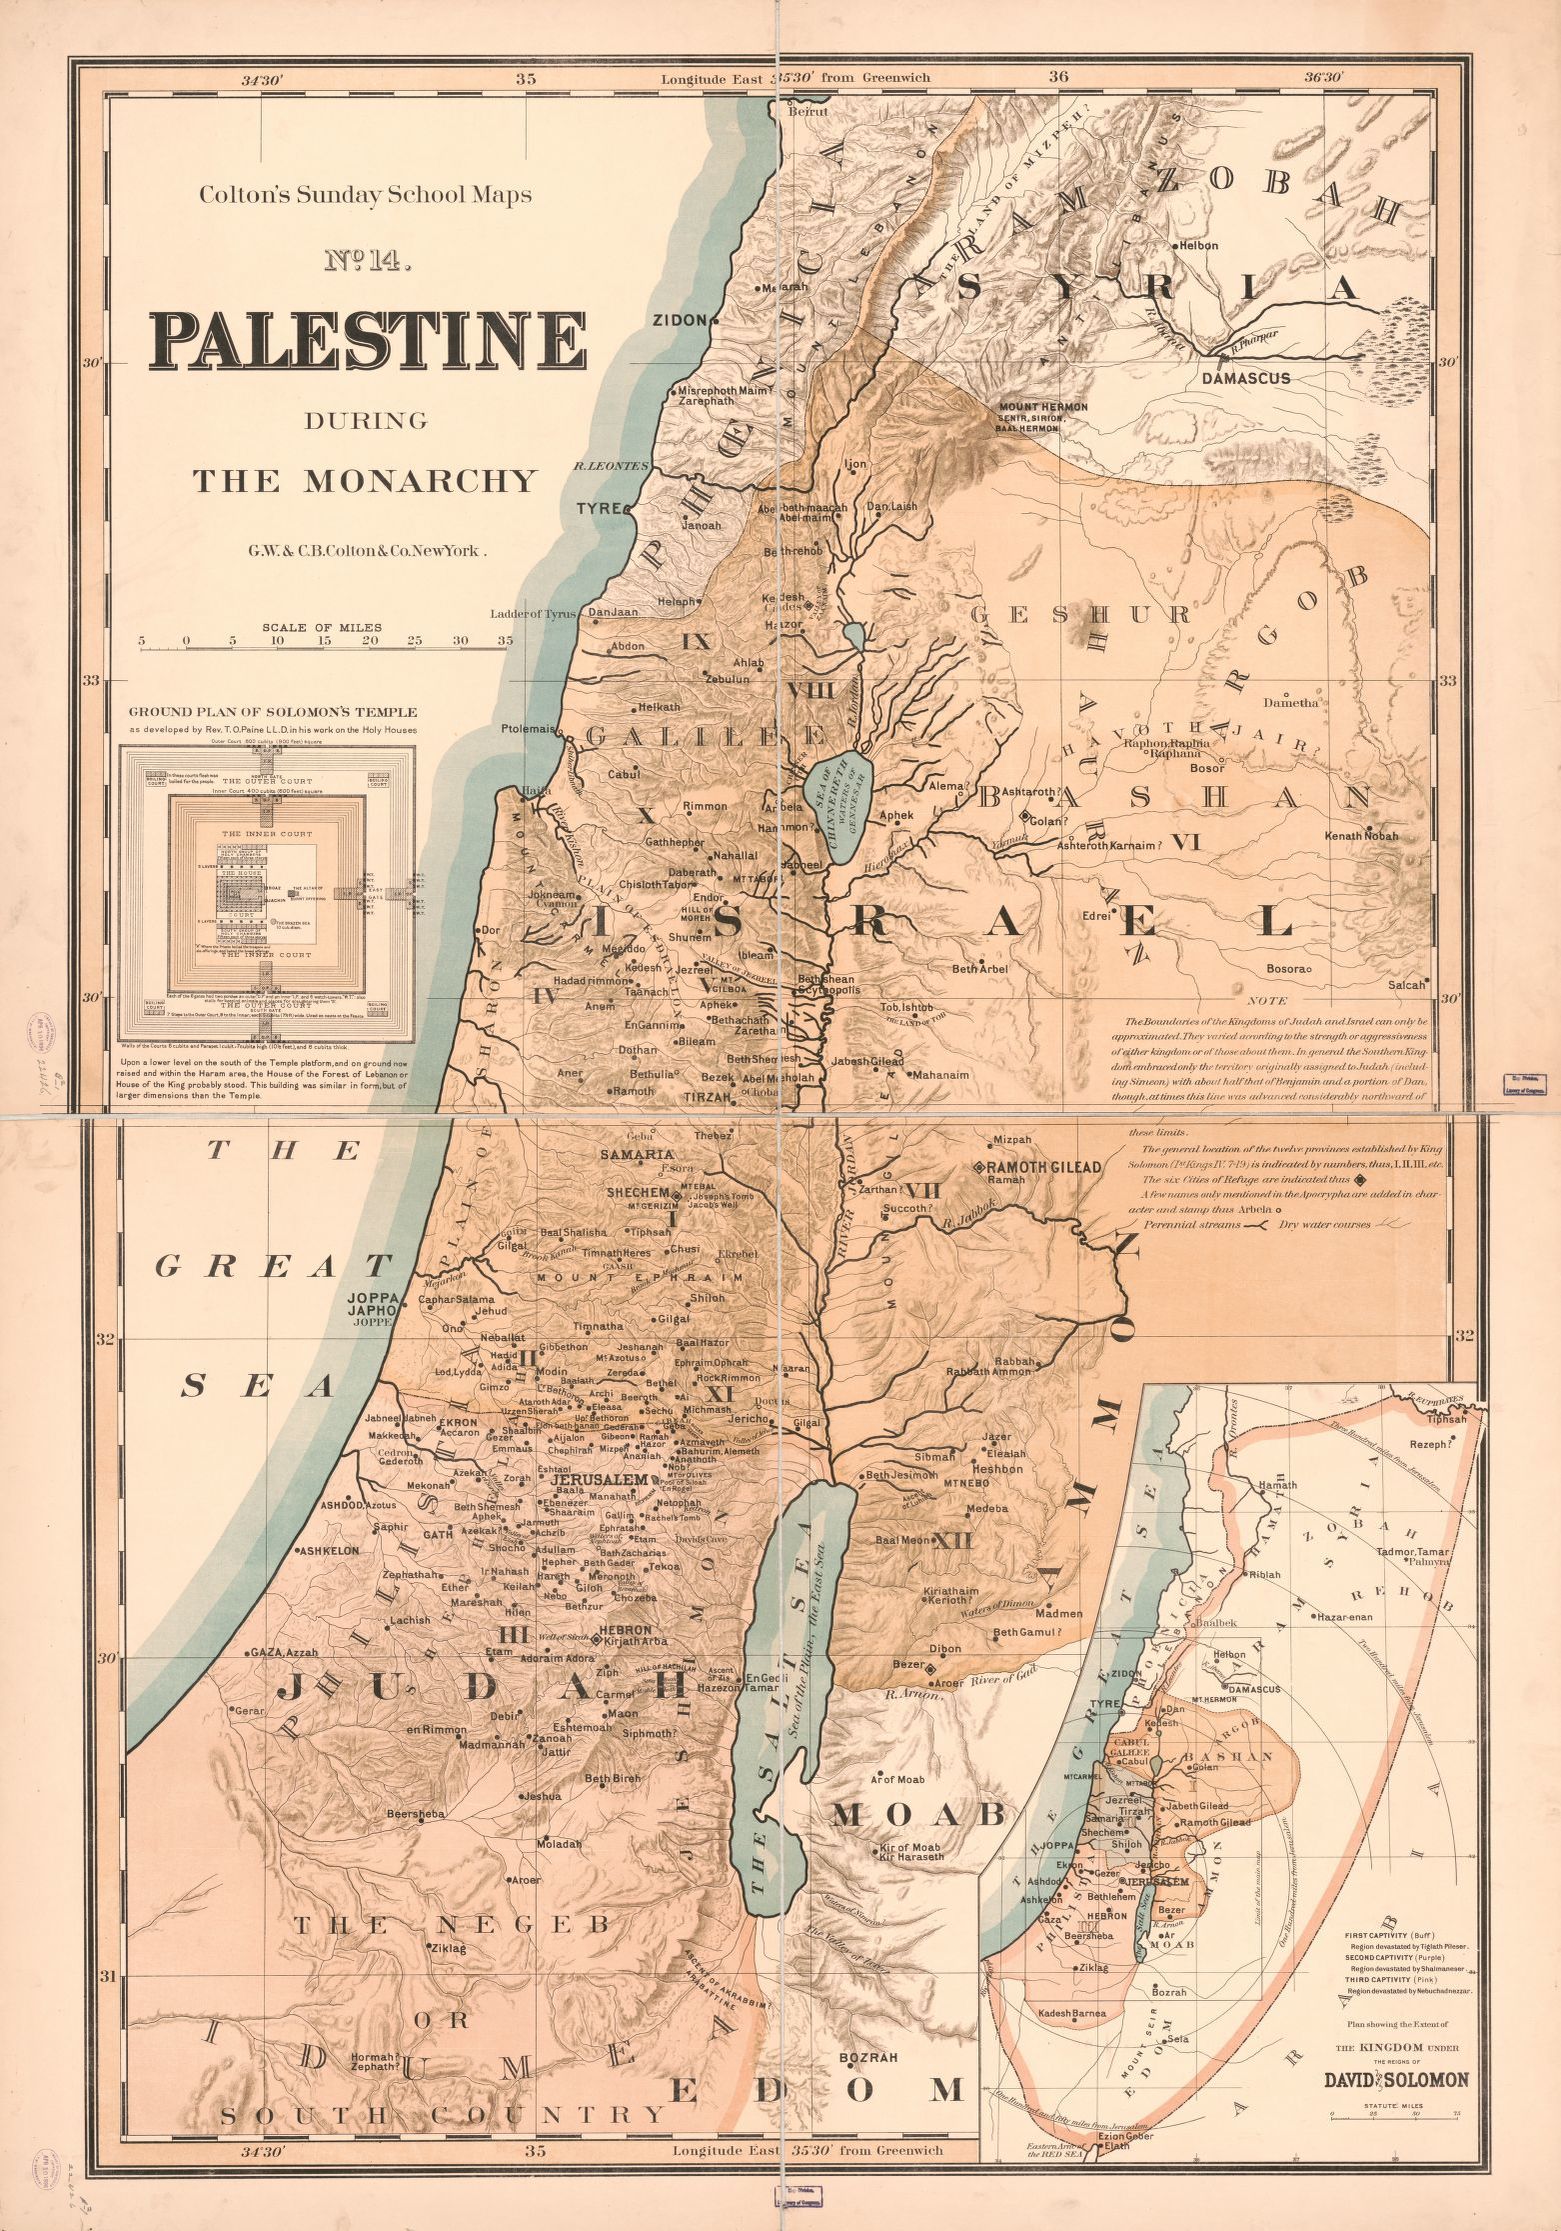  Palestine During The Monarchy